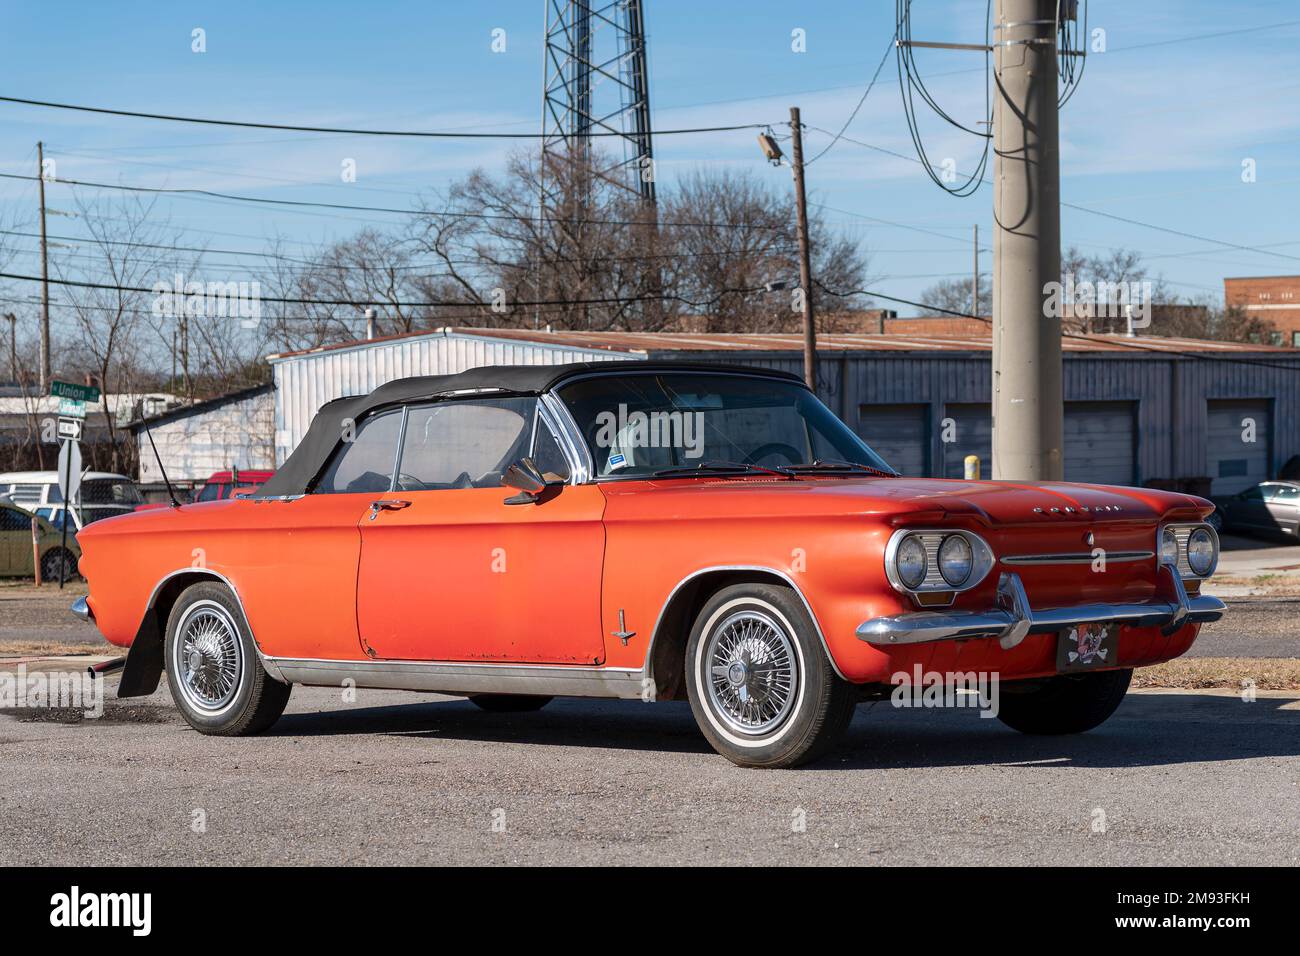 Vintage antique 1963 red Chevrolet Corvair 900 Monza Spyder convertible, a rear engine air cooled car or automobile parked in Montgomery Alabama, USA. Stock Photo